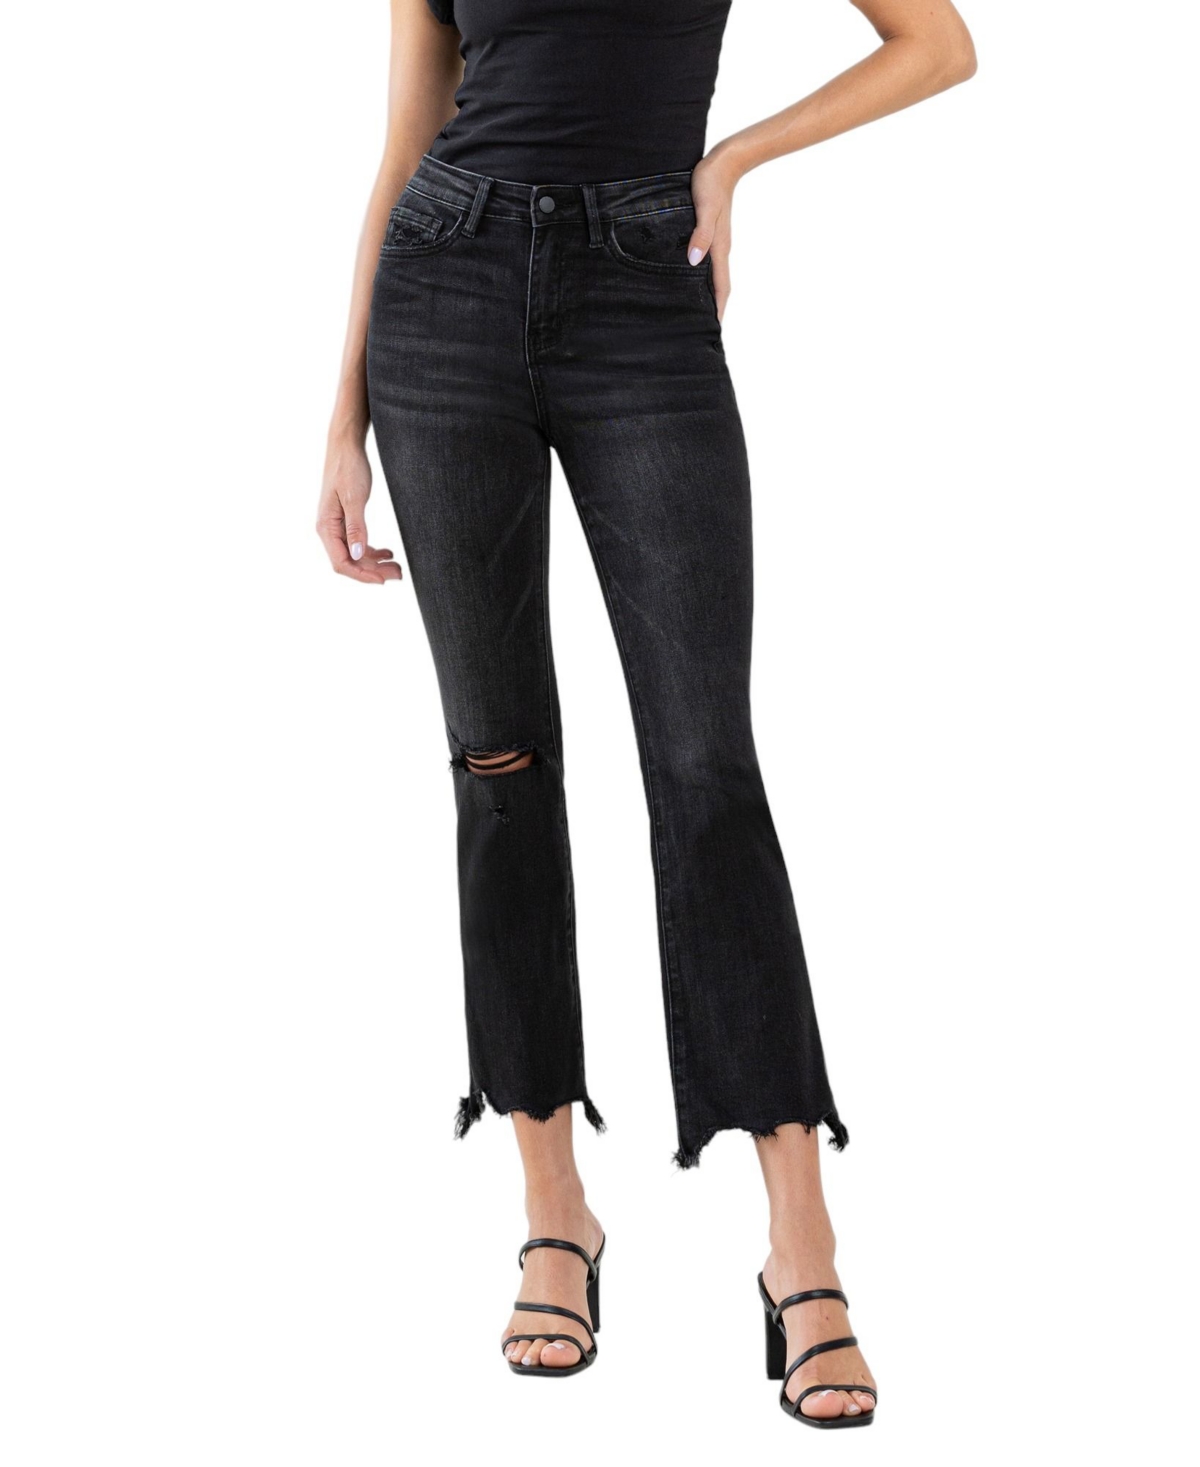 Women's High Rise Ankle Bootcut Jeans - Flawlessly black